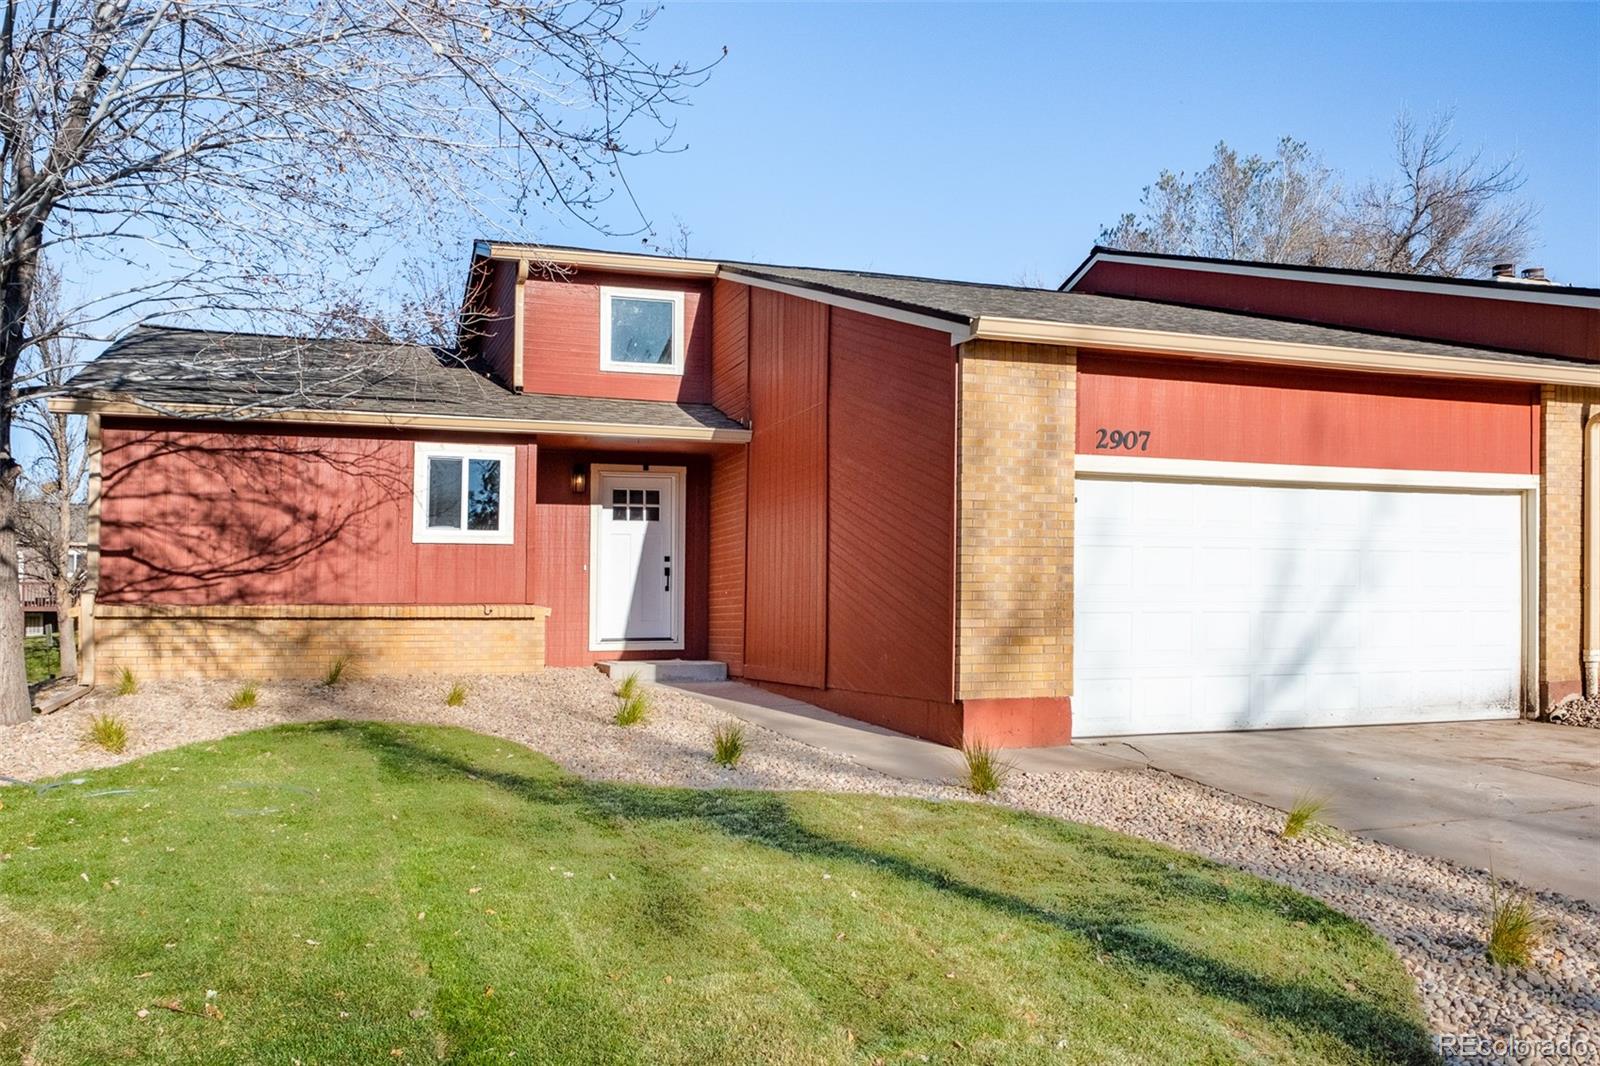 2907 w rowland avenue, littleton sold home. Closed on 2024-01-05 for $482,500.